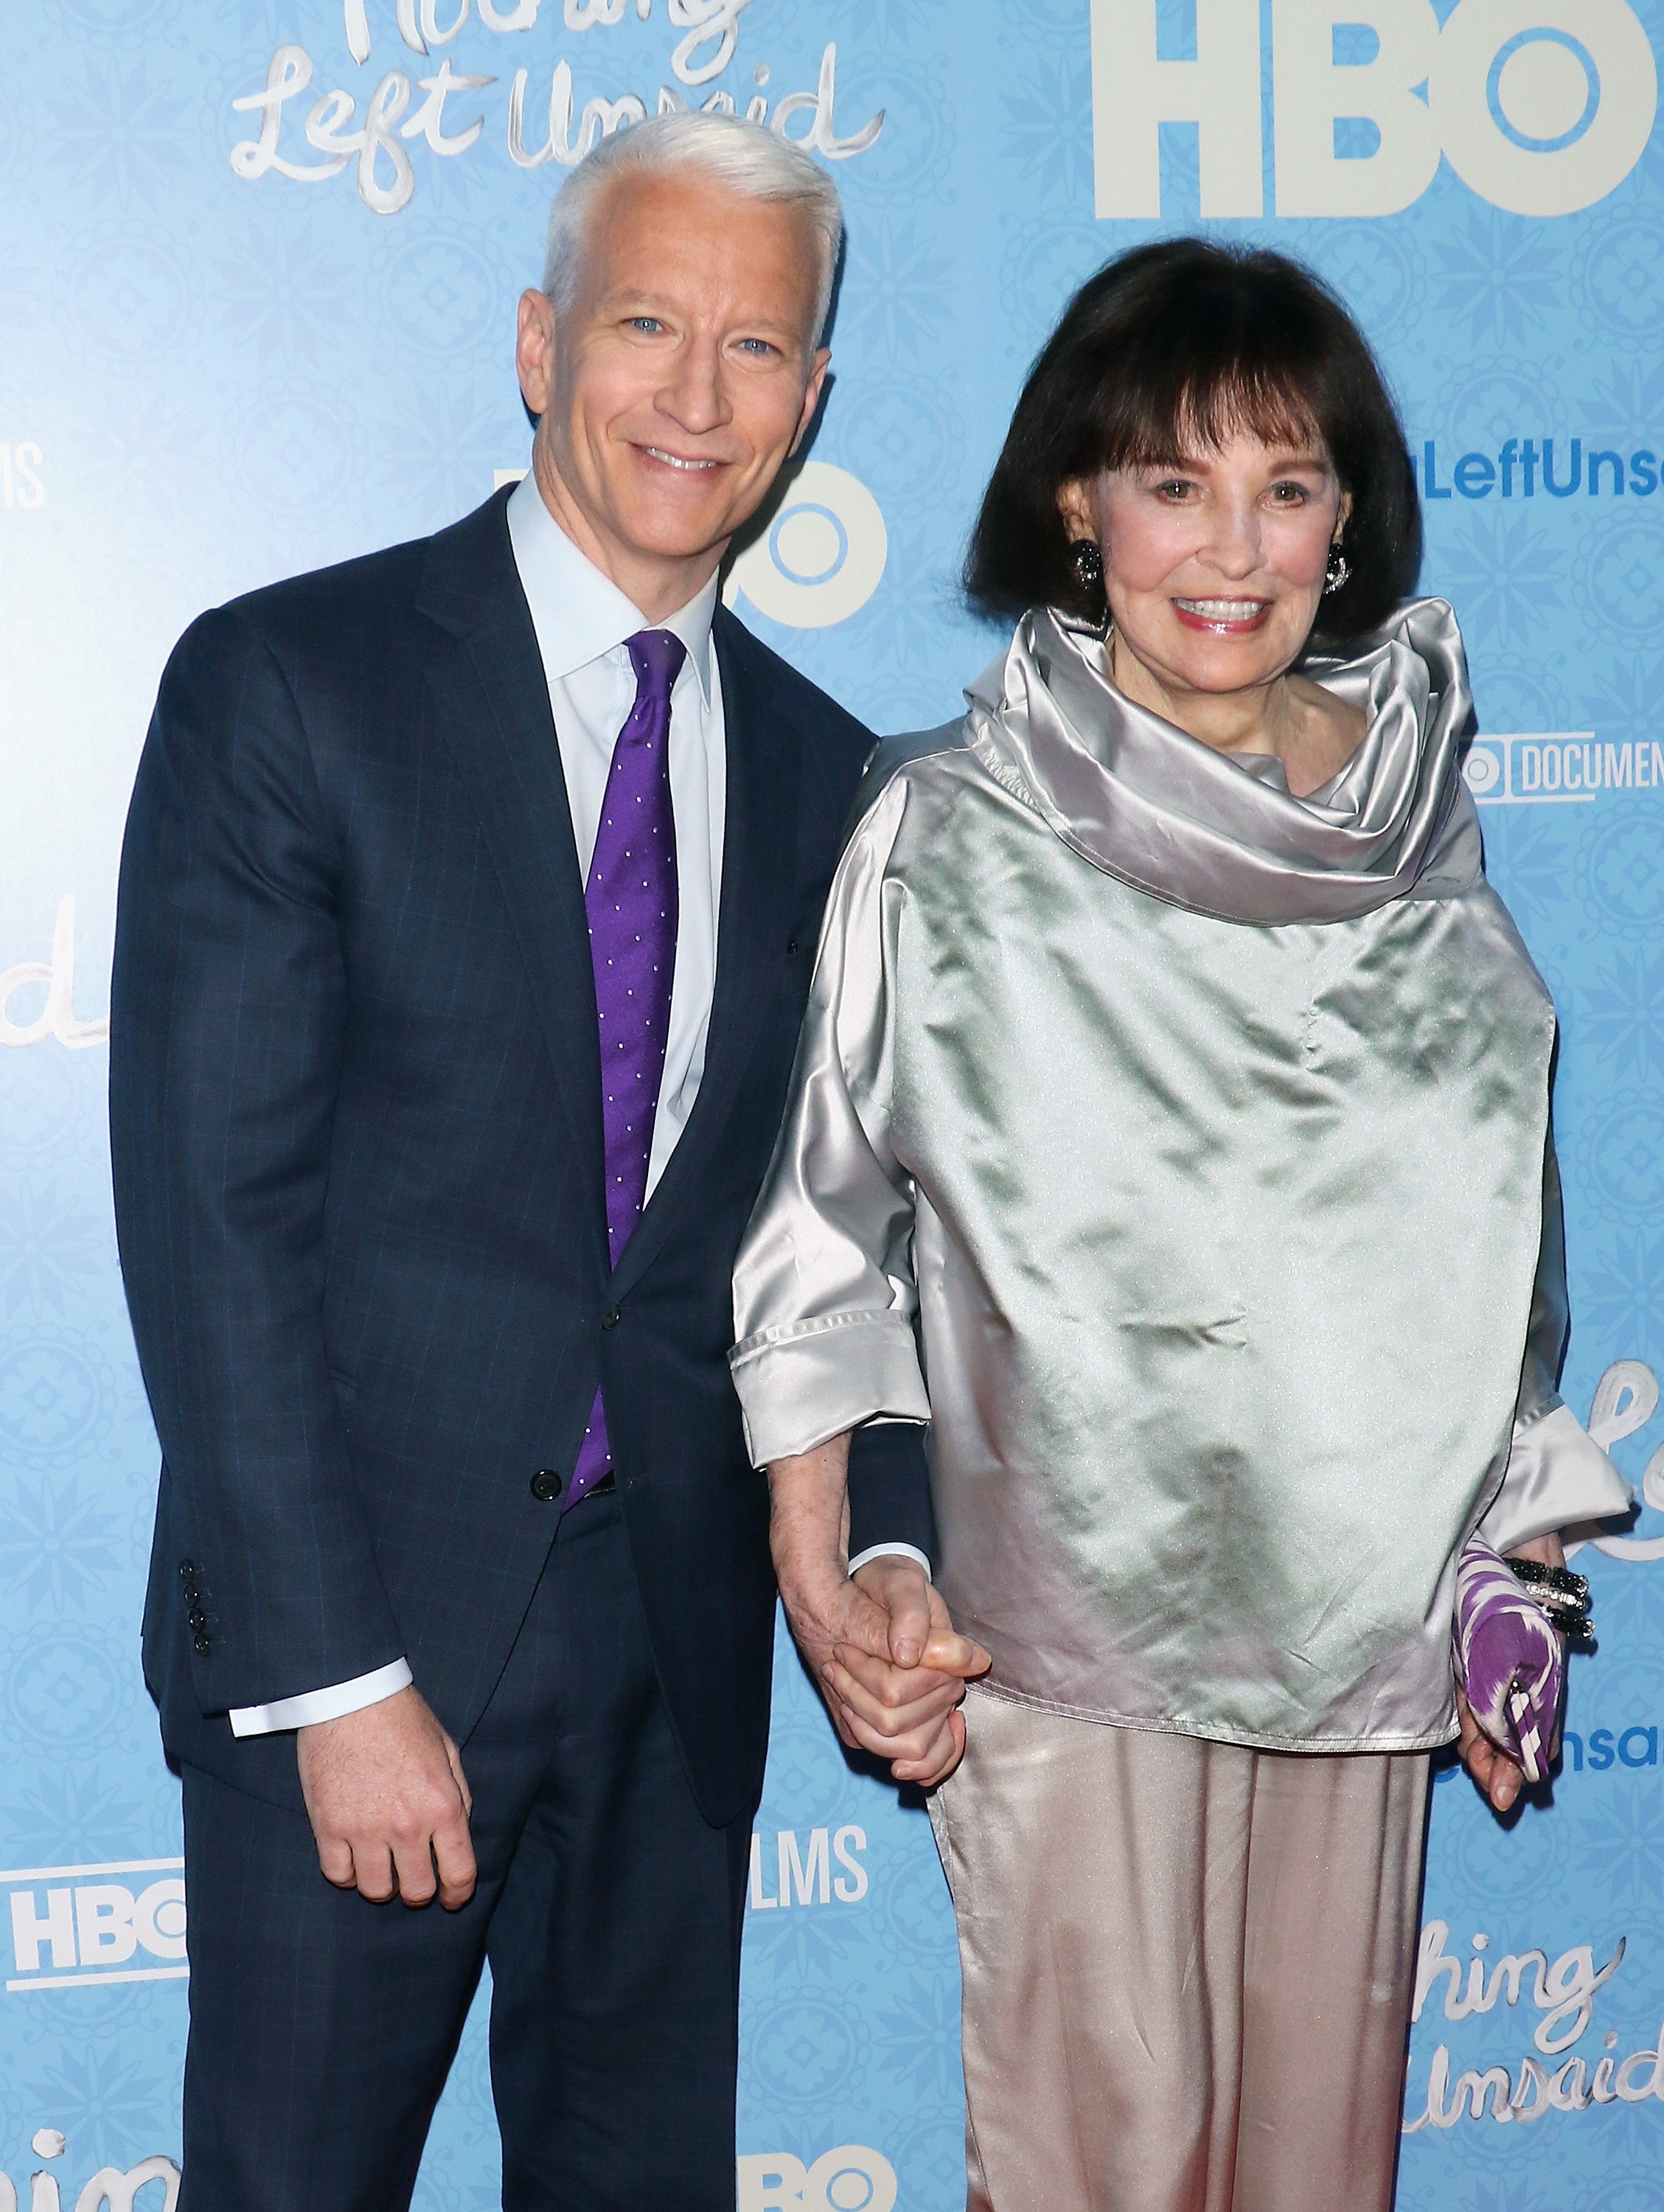 Anderson Cooper and his mother Gloria Vanderbilt at the "Nothing Left Unsaid" premiere at Time Warner Center on April 4, 2016, in New York City | Source: Getty Images